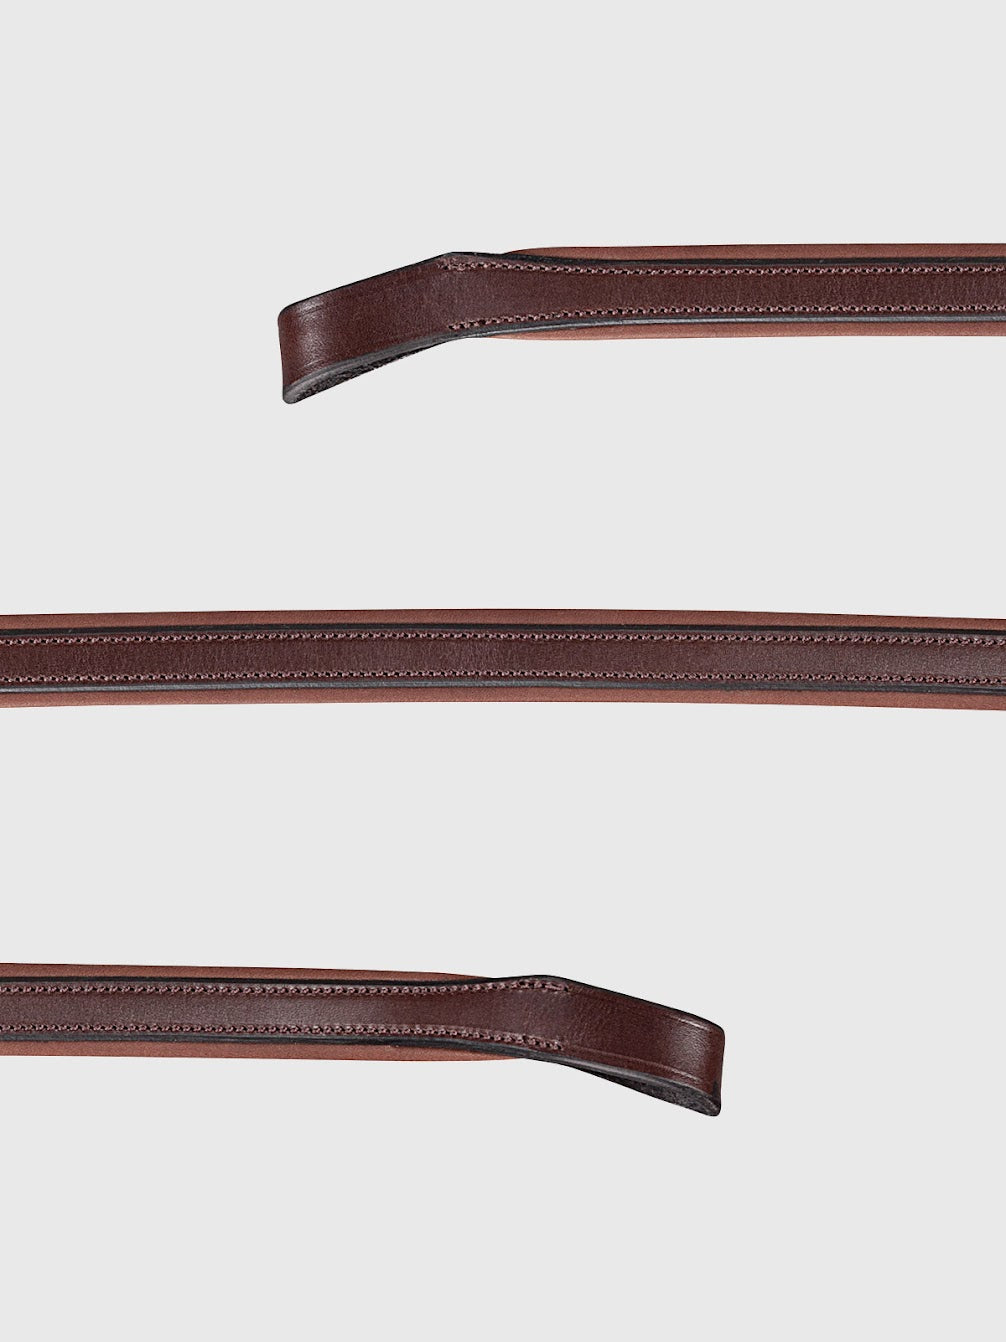 The Equiline brown browband made in stunning Italian leather. This browband is lined with brown padding giving this piece a two tone brown effect for a classy look and also offers maximum comfort for your horse.